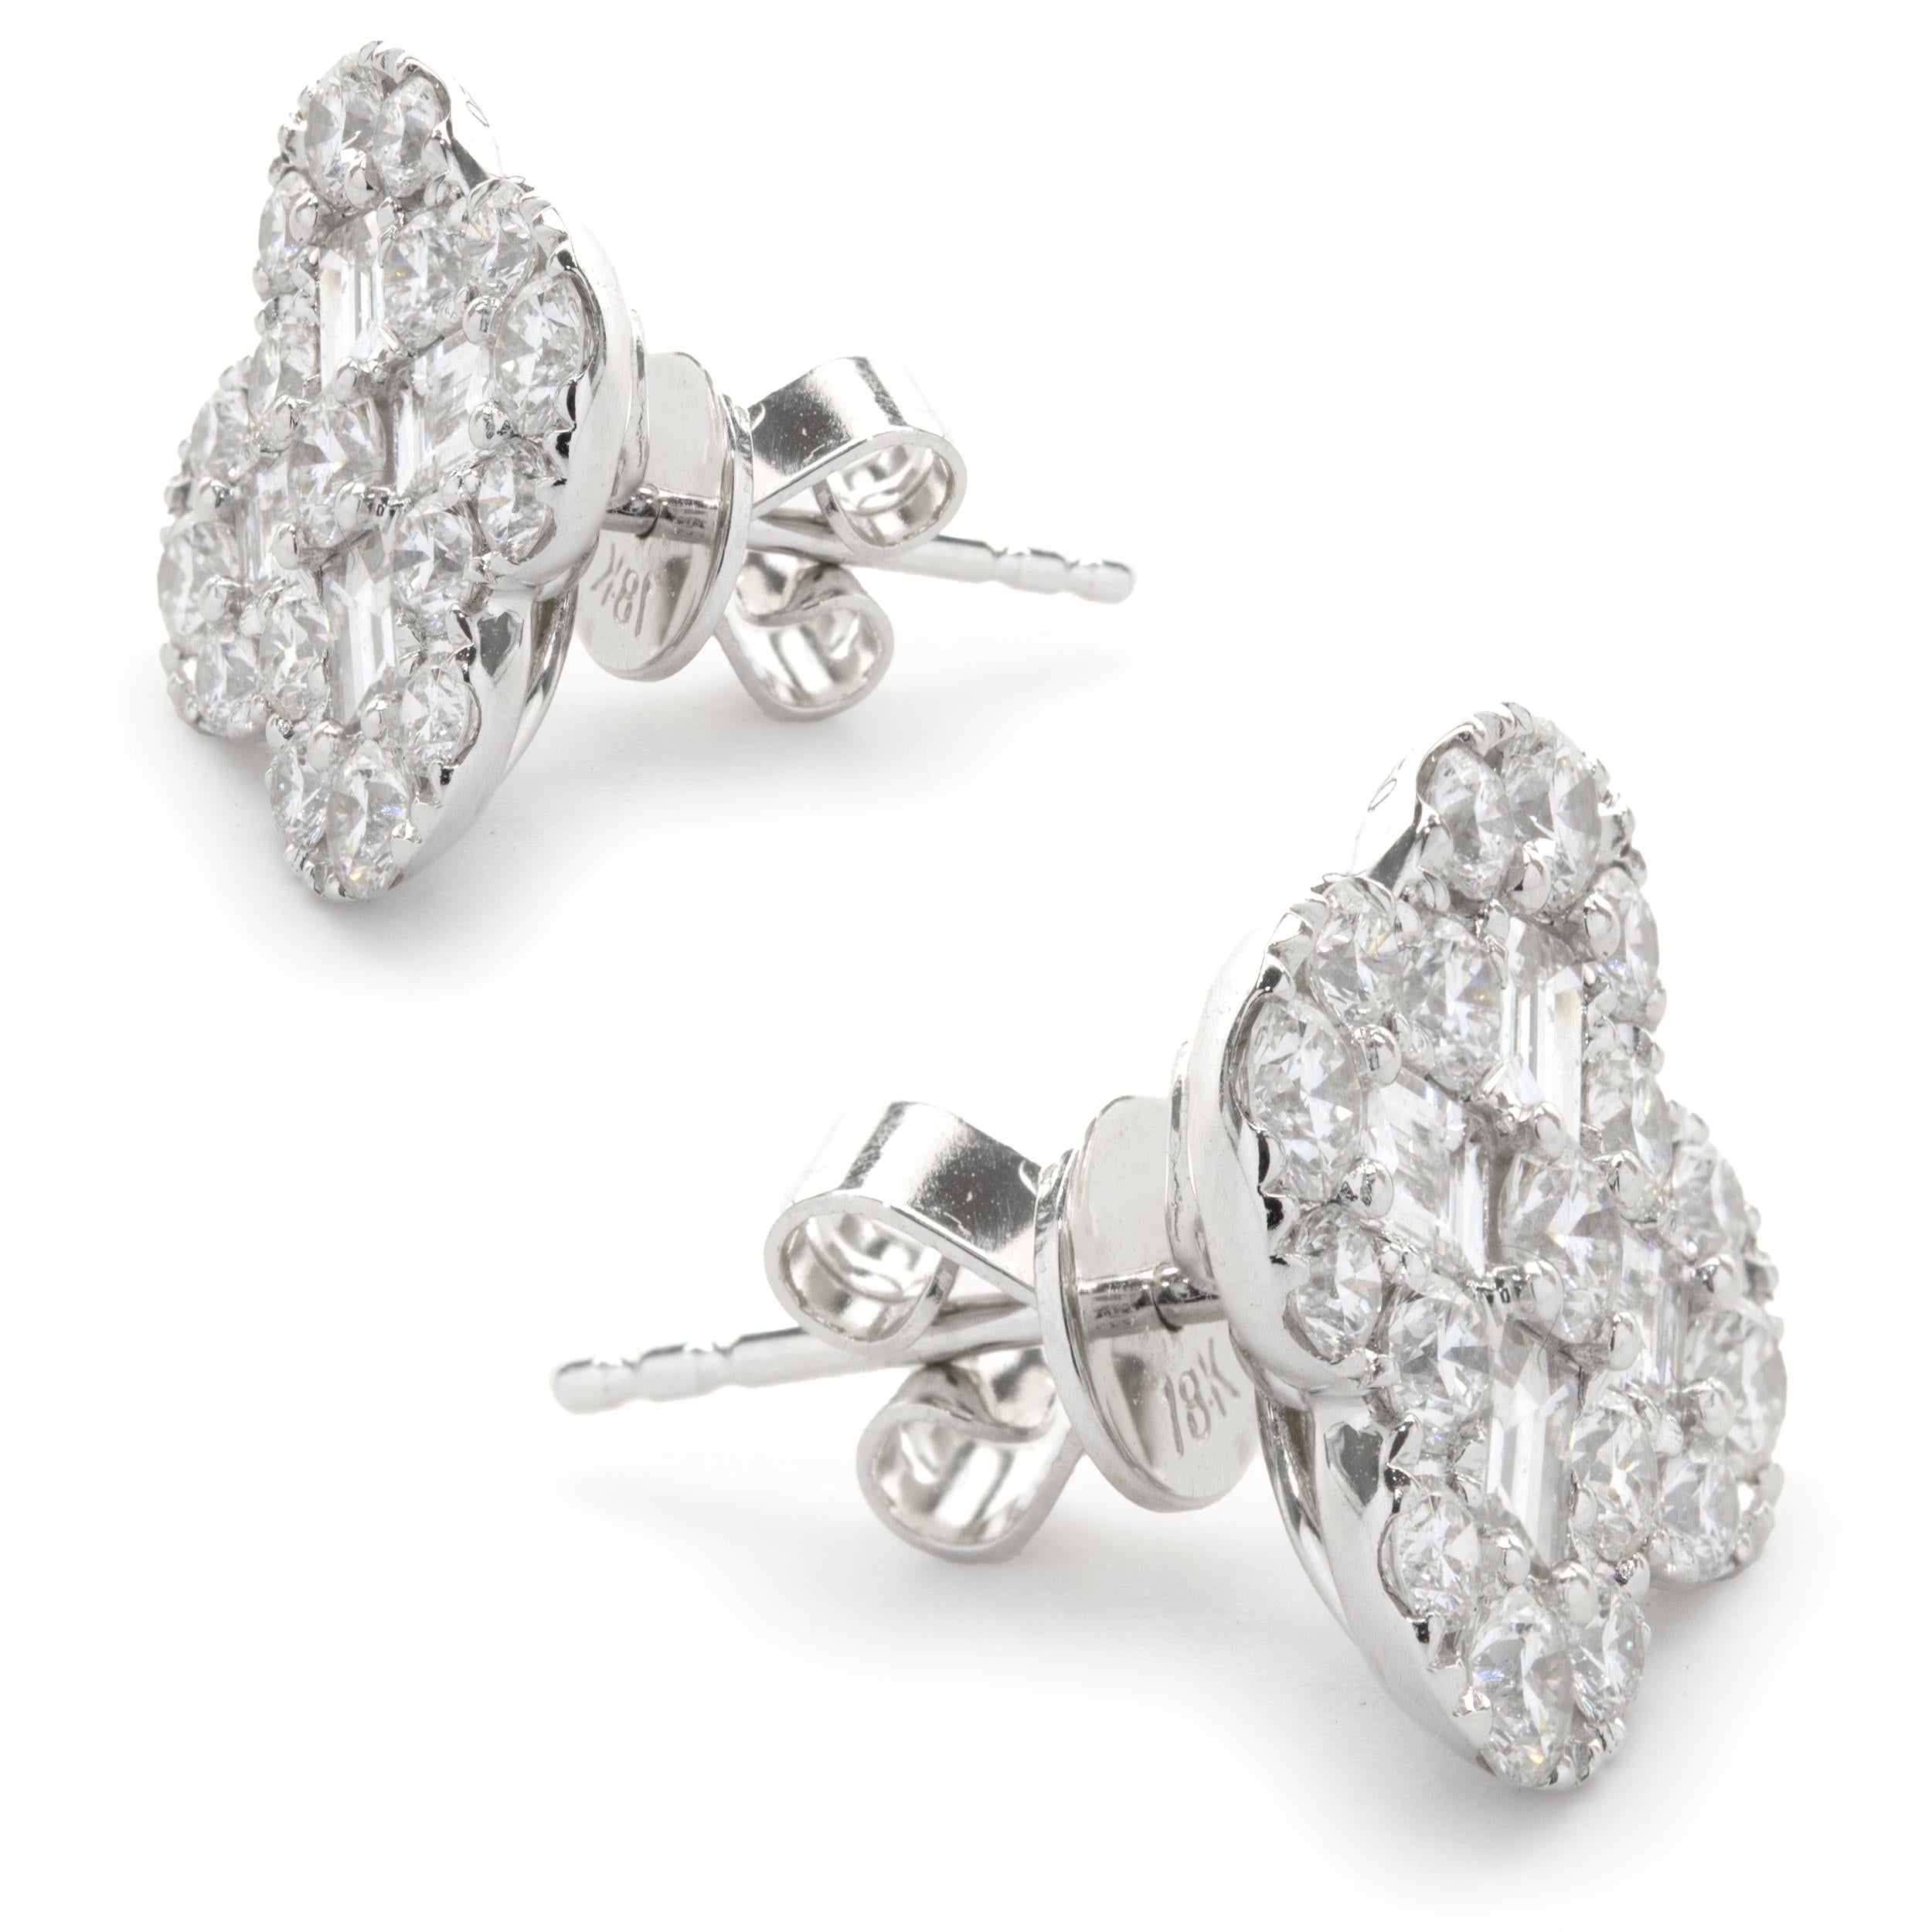 Designer: custom
Material: 18K white gold
Diamond: 8 baguette cut = 0.69cttw
Color: G
Clarity: SI1
Diamond: 34 round brilliant cut = 1.52cttw 
Color: G
Clarity: SI1
Dimensions: earrings measure 14.40mm in length
Fastenings: post with friction